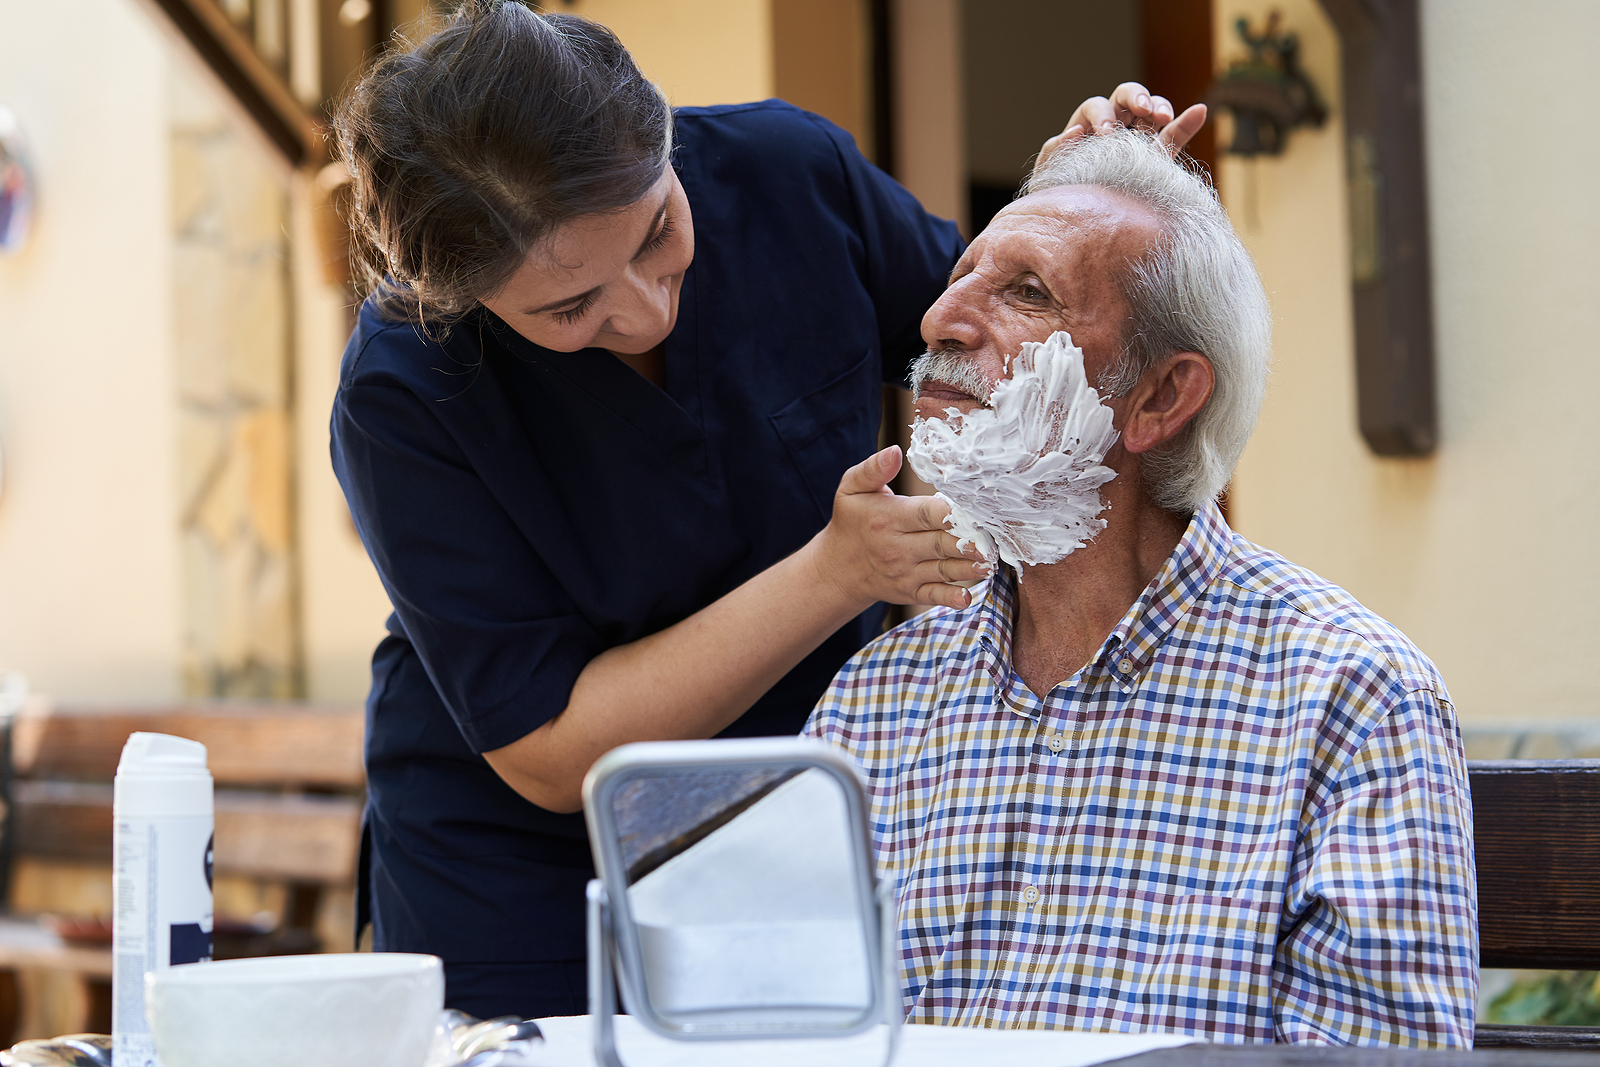 How Can Personal Care at Home Help Seniors with Diabetic Eye Disease?